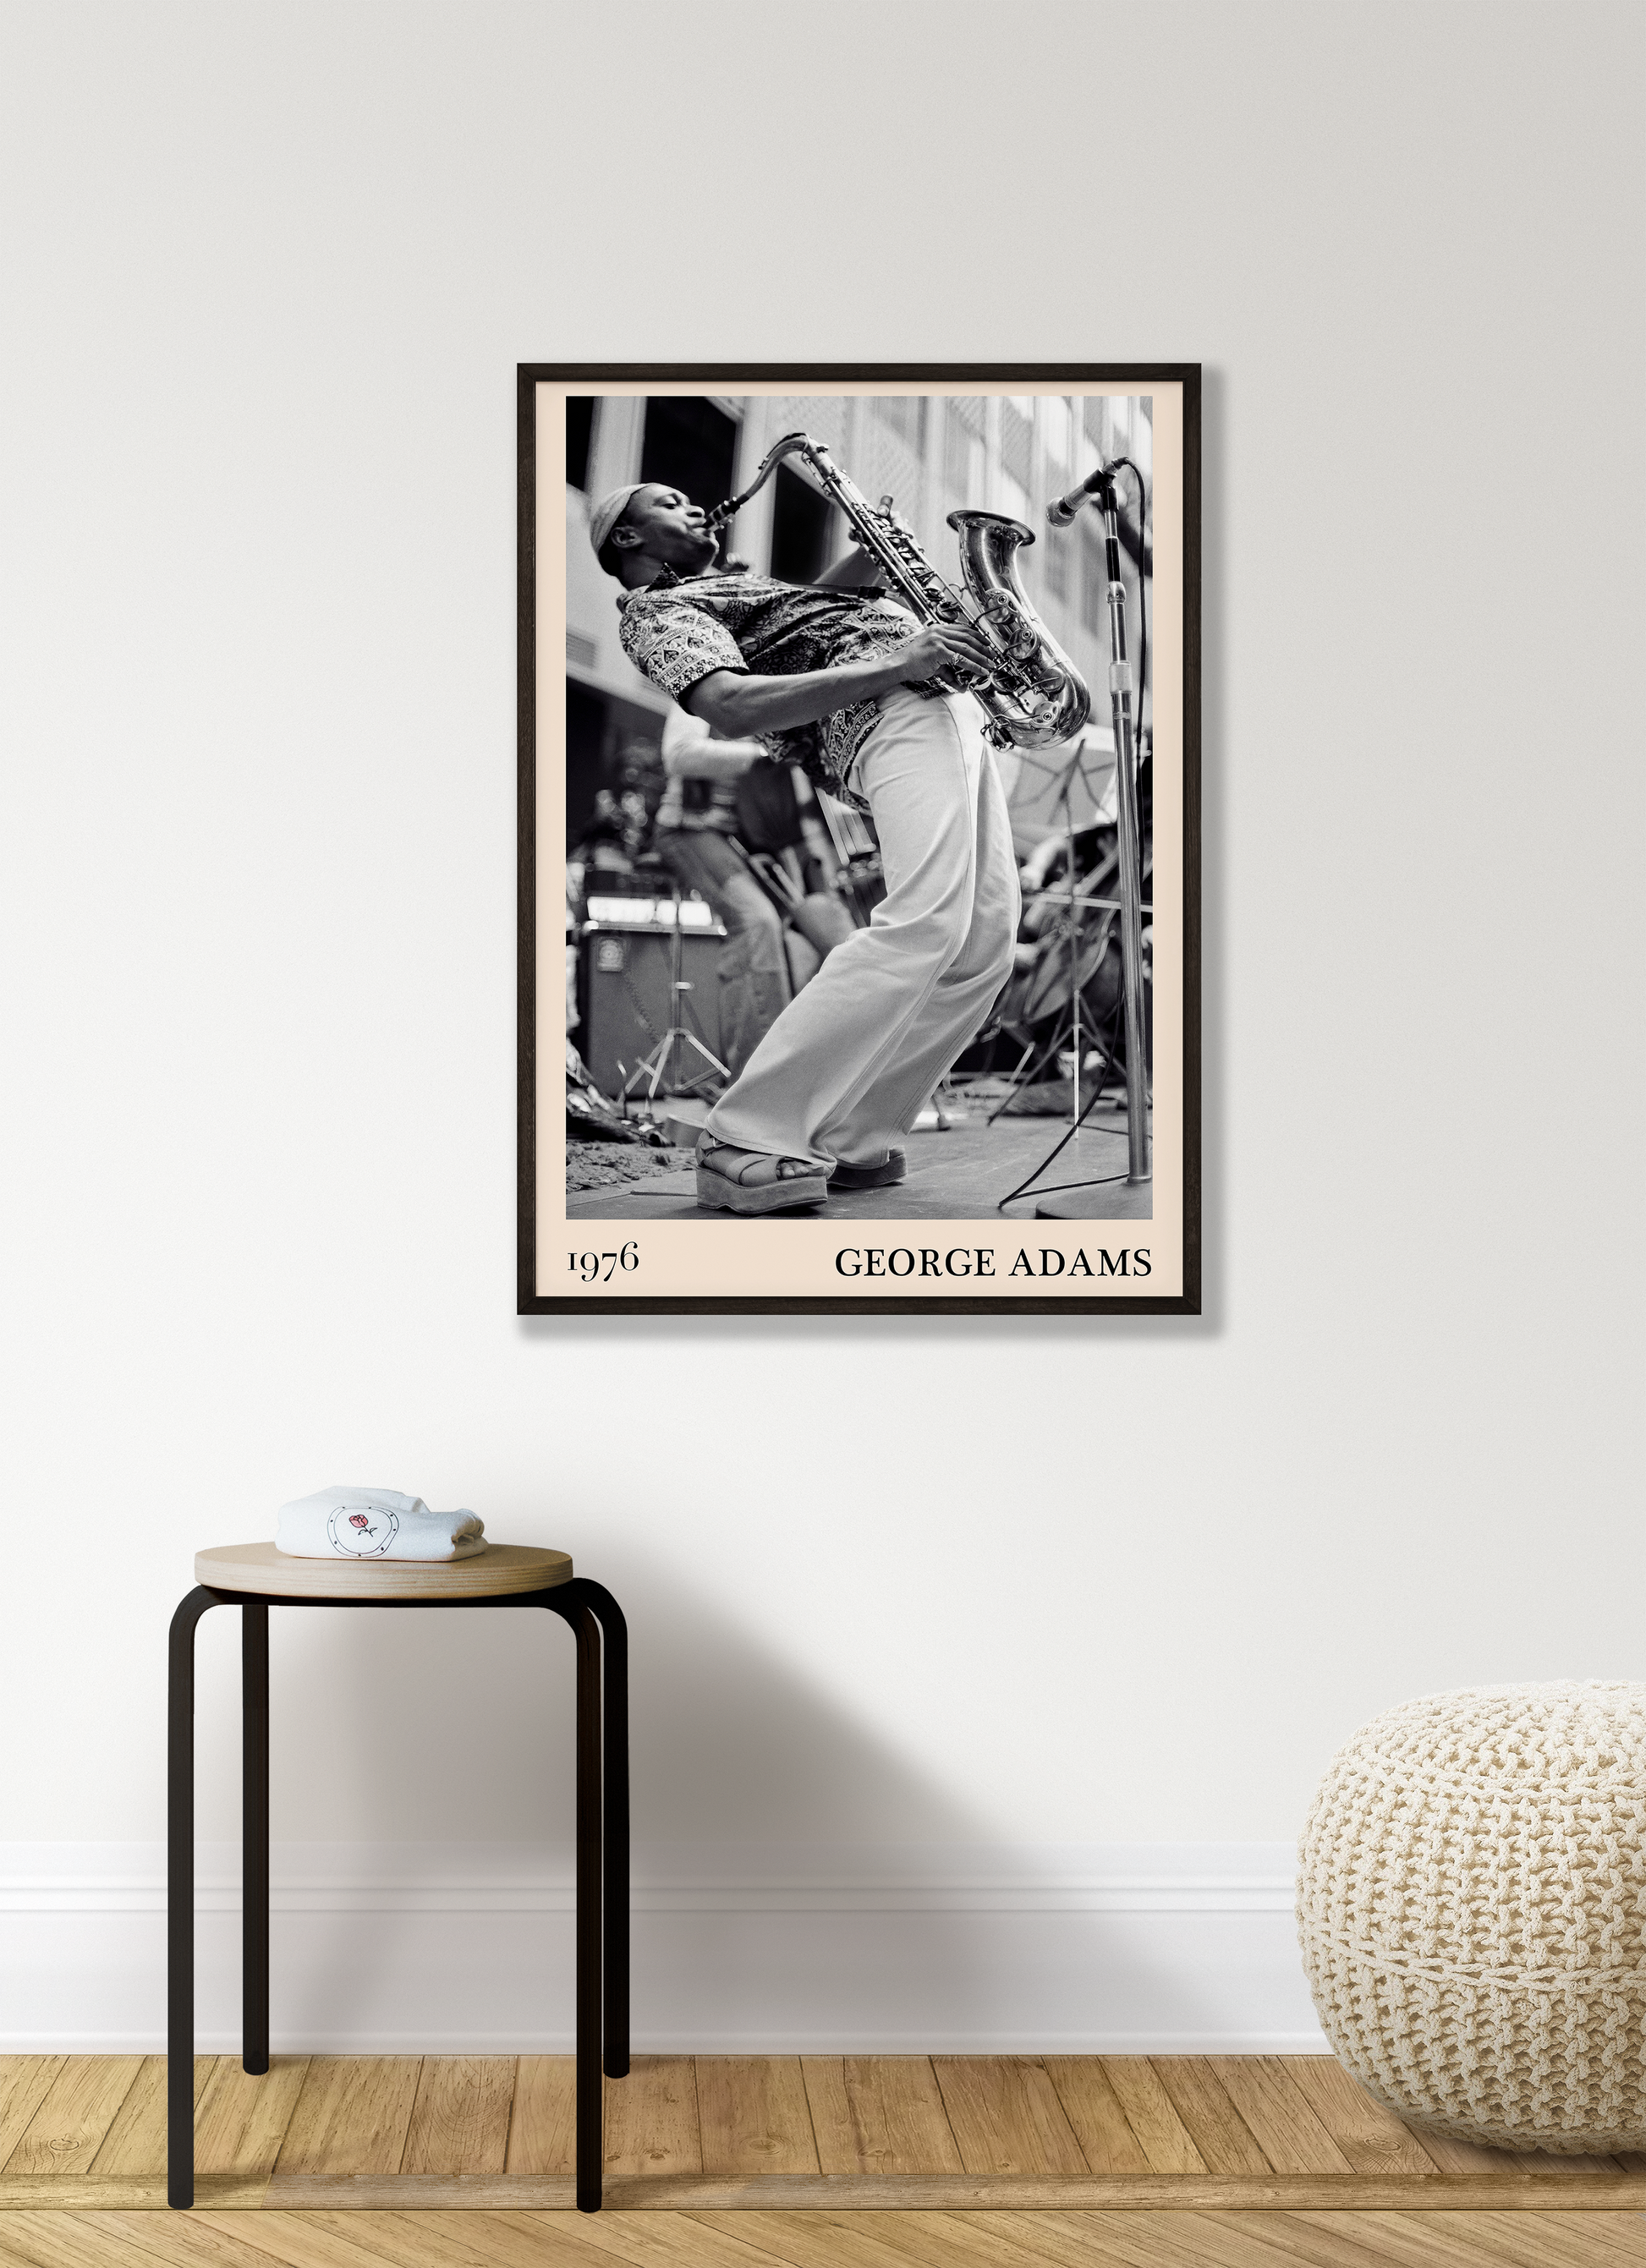 1976 photograph of George Adams taken by Thomas Marcello. Picture crafted into a cool black framed jazz print, with an off-white border. Poster is hanging on a white living room wall.